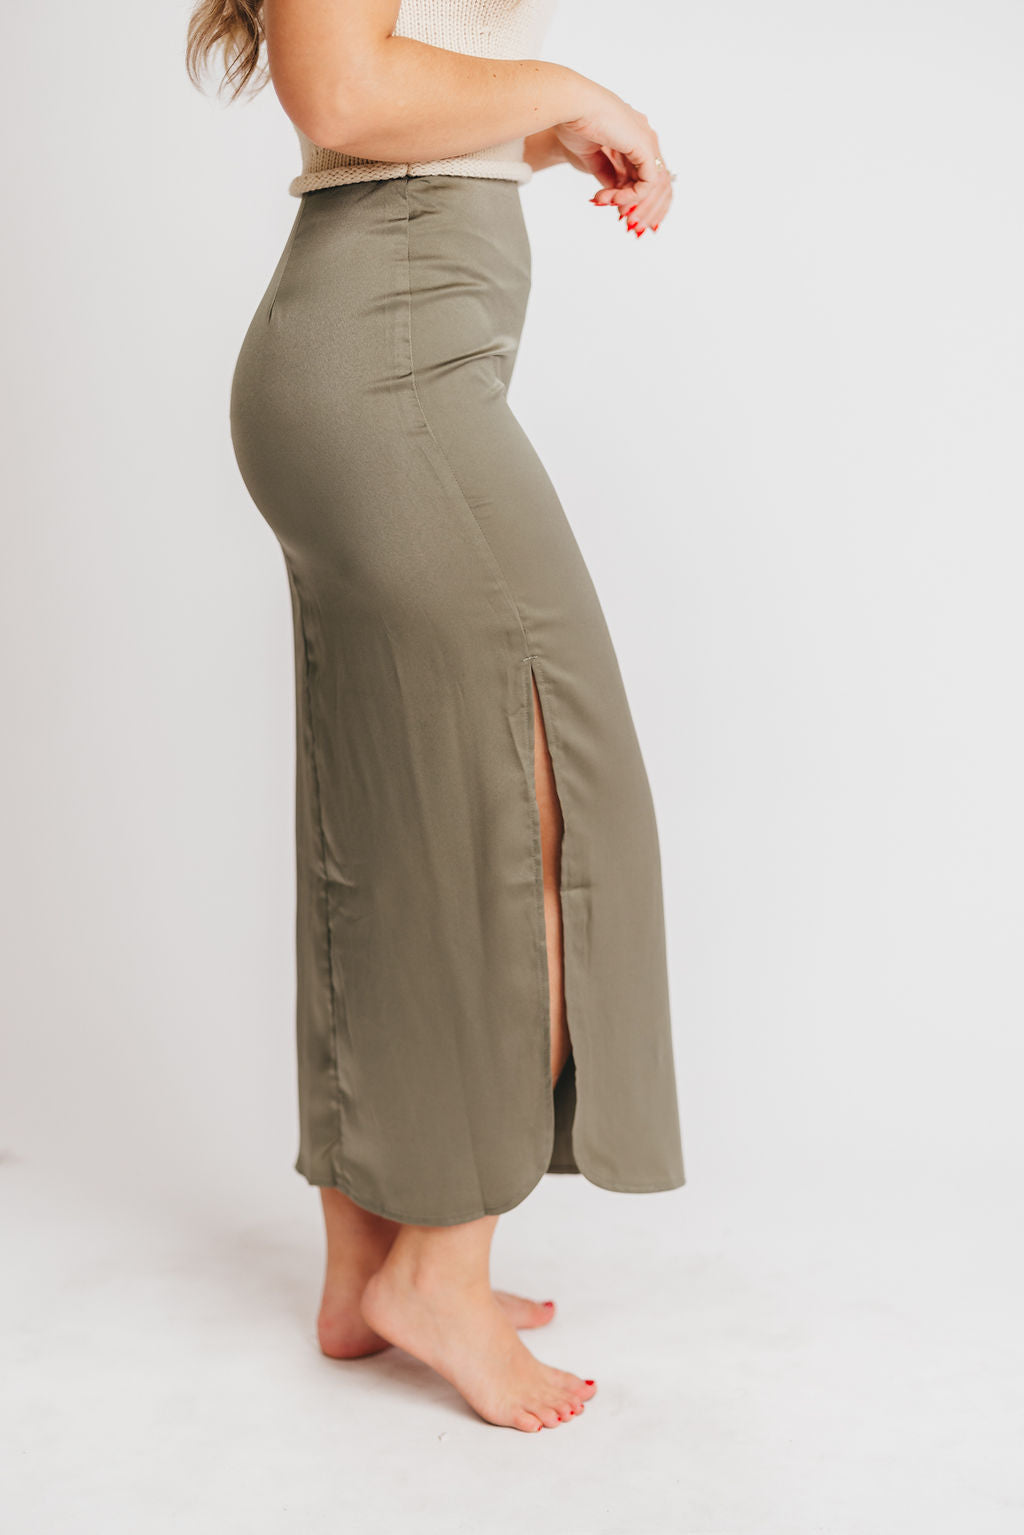 Mira Satin Skirt with Side Slit in Olive